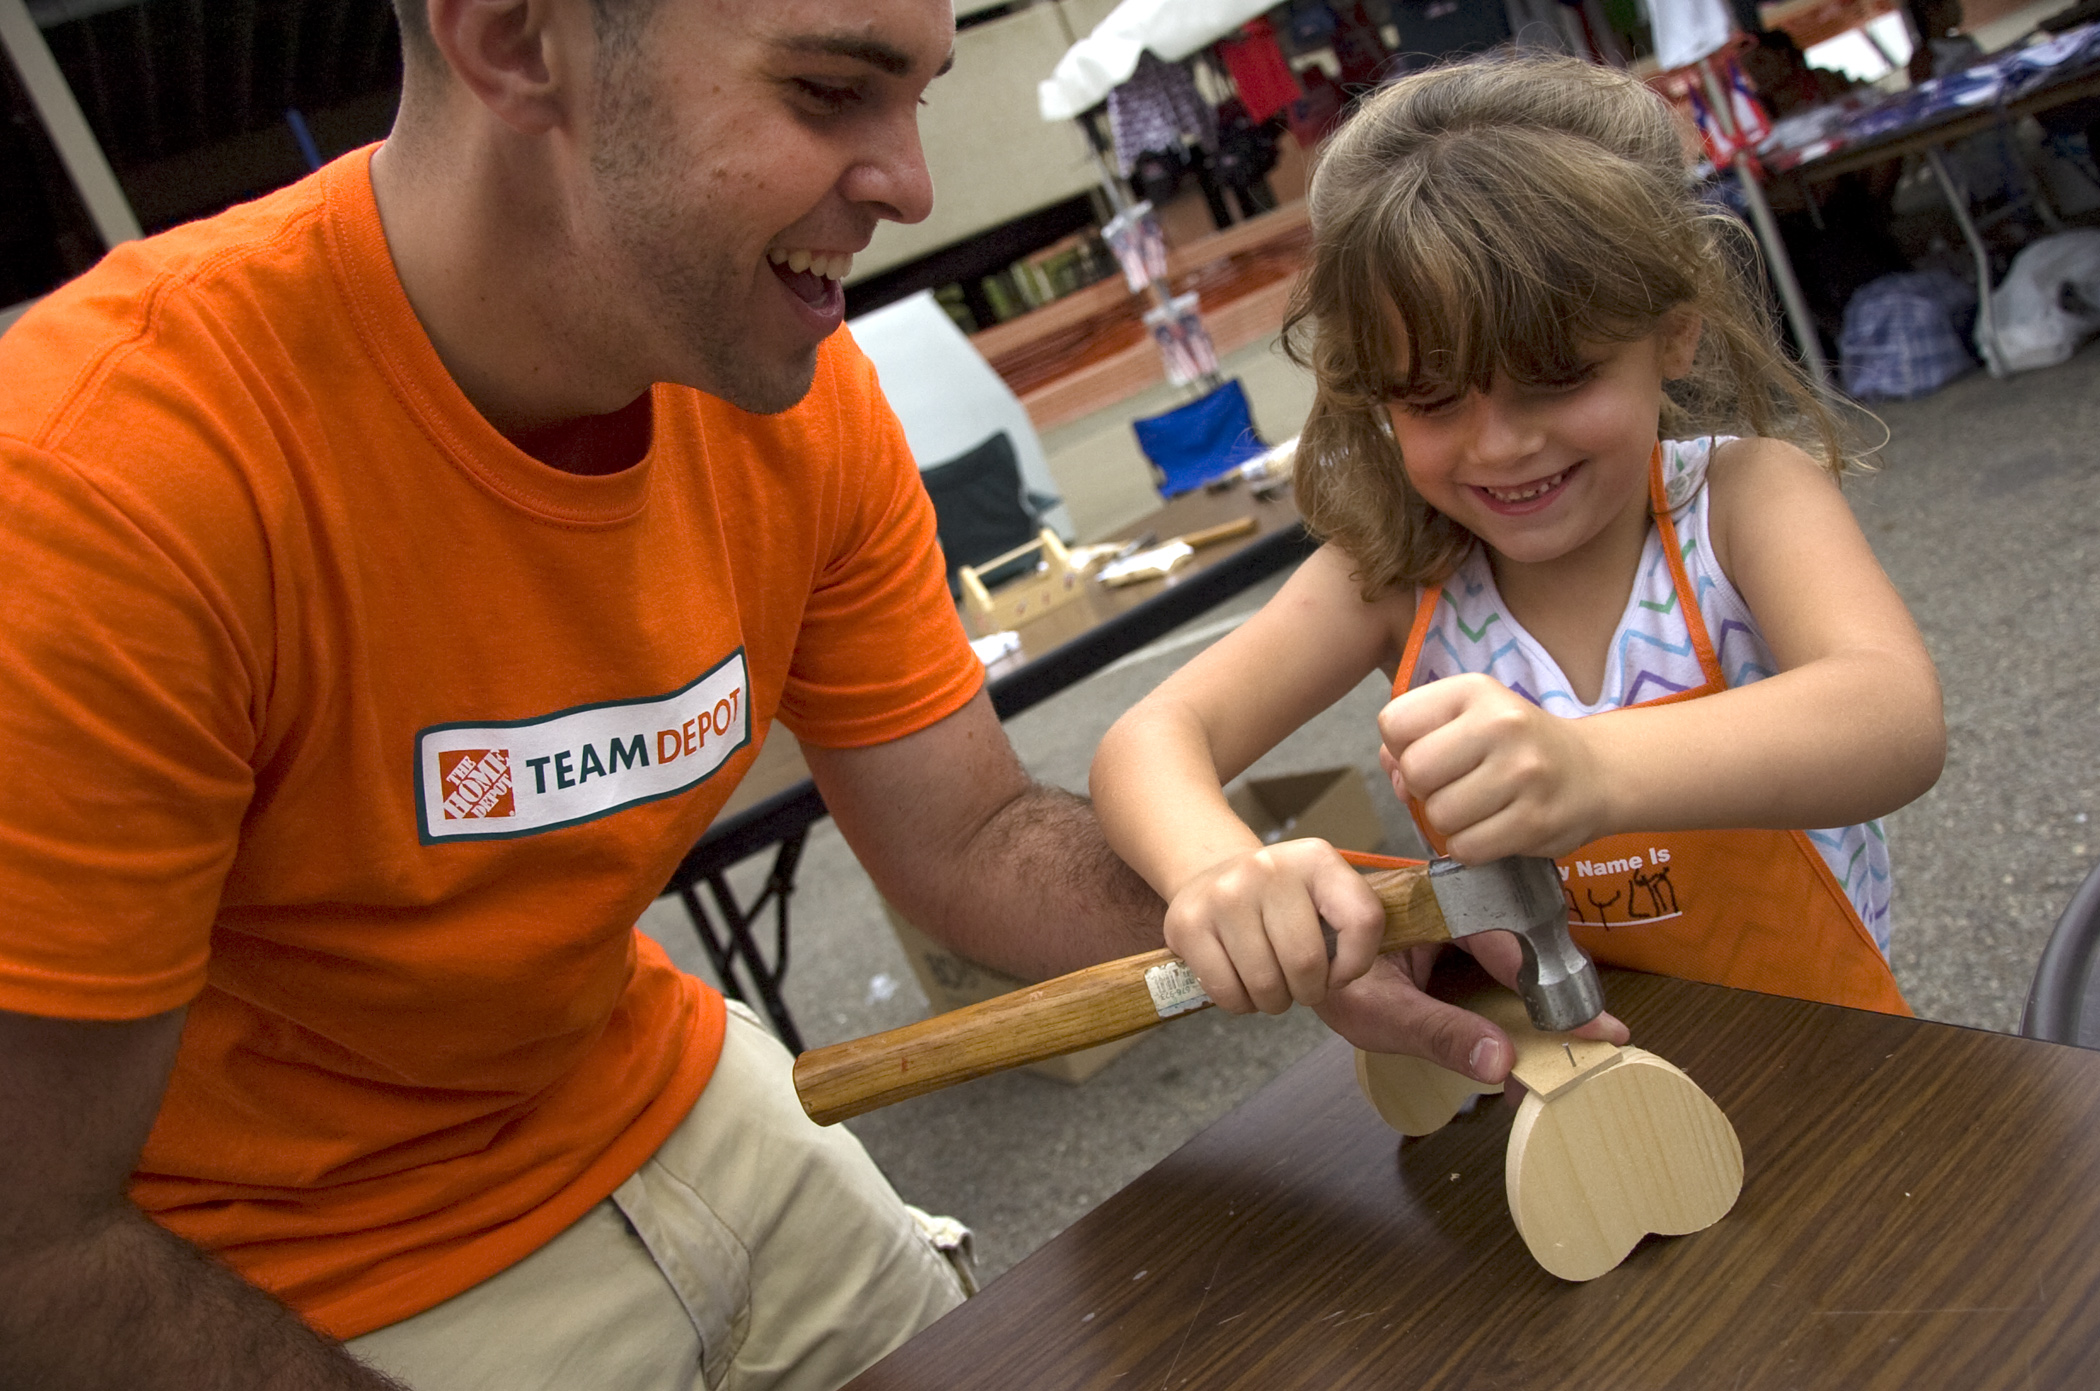 Kelli Cardinal/The Vindicator
John Farris, from Poland, helps Raylyn (ok) Mercer, 5, from Campbell, make a heart basket Sunday in the Home Depot workshop for kids during the Spanish Heritage Festival in downtown Youngstown.